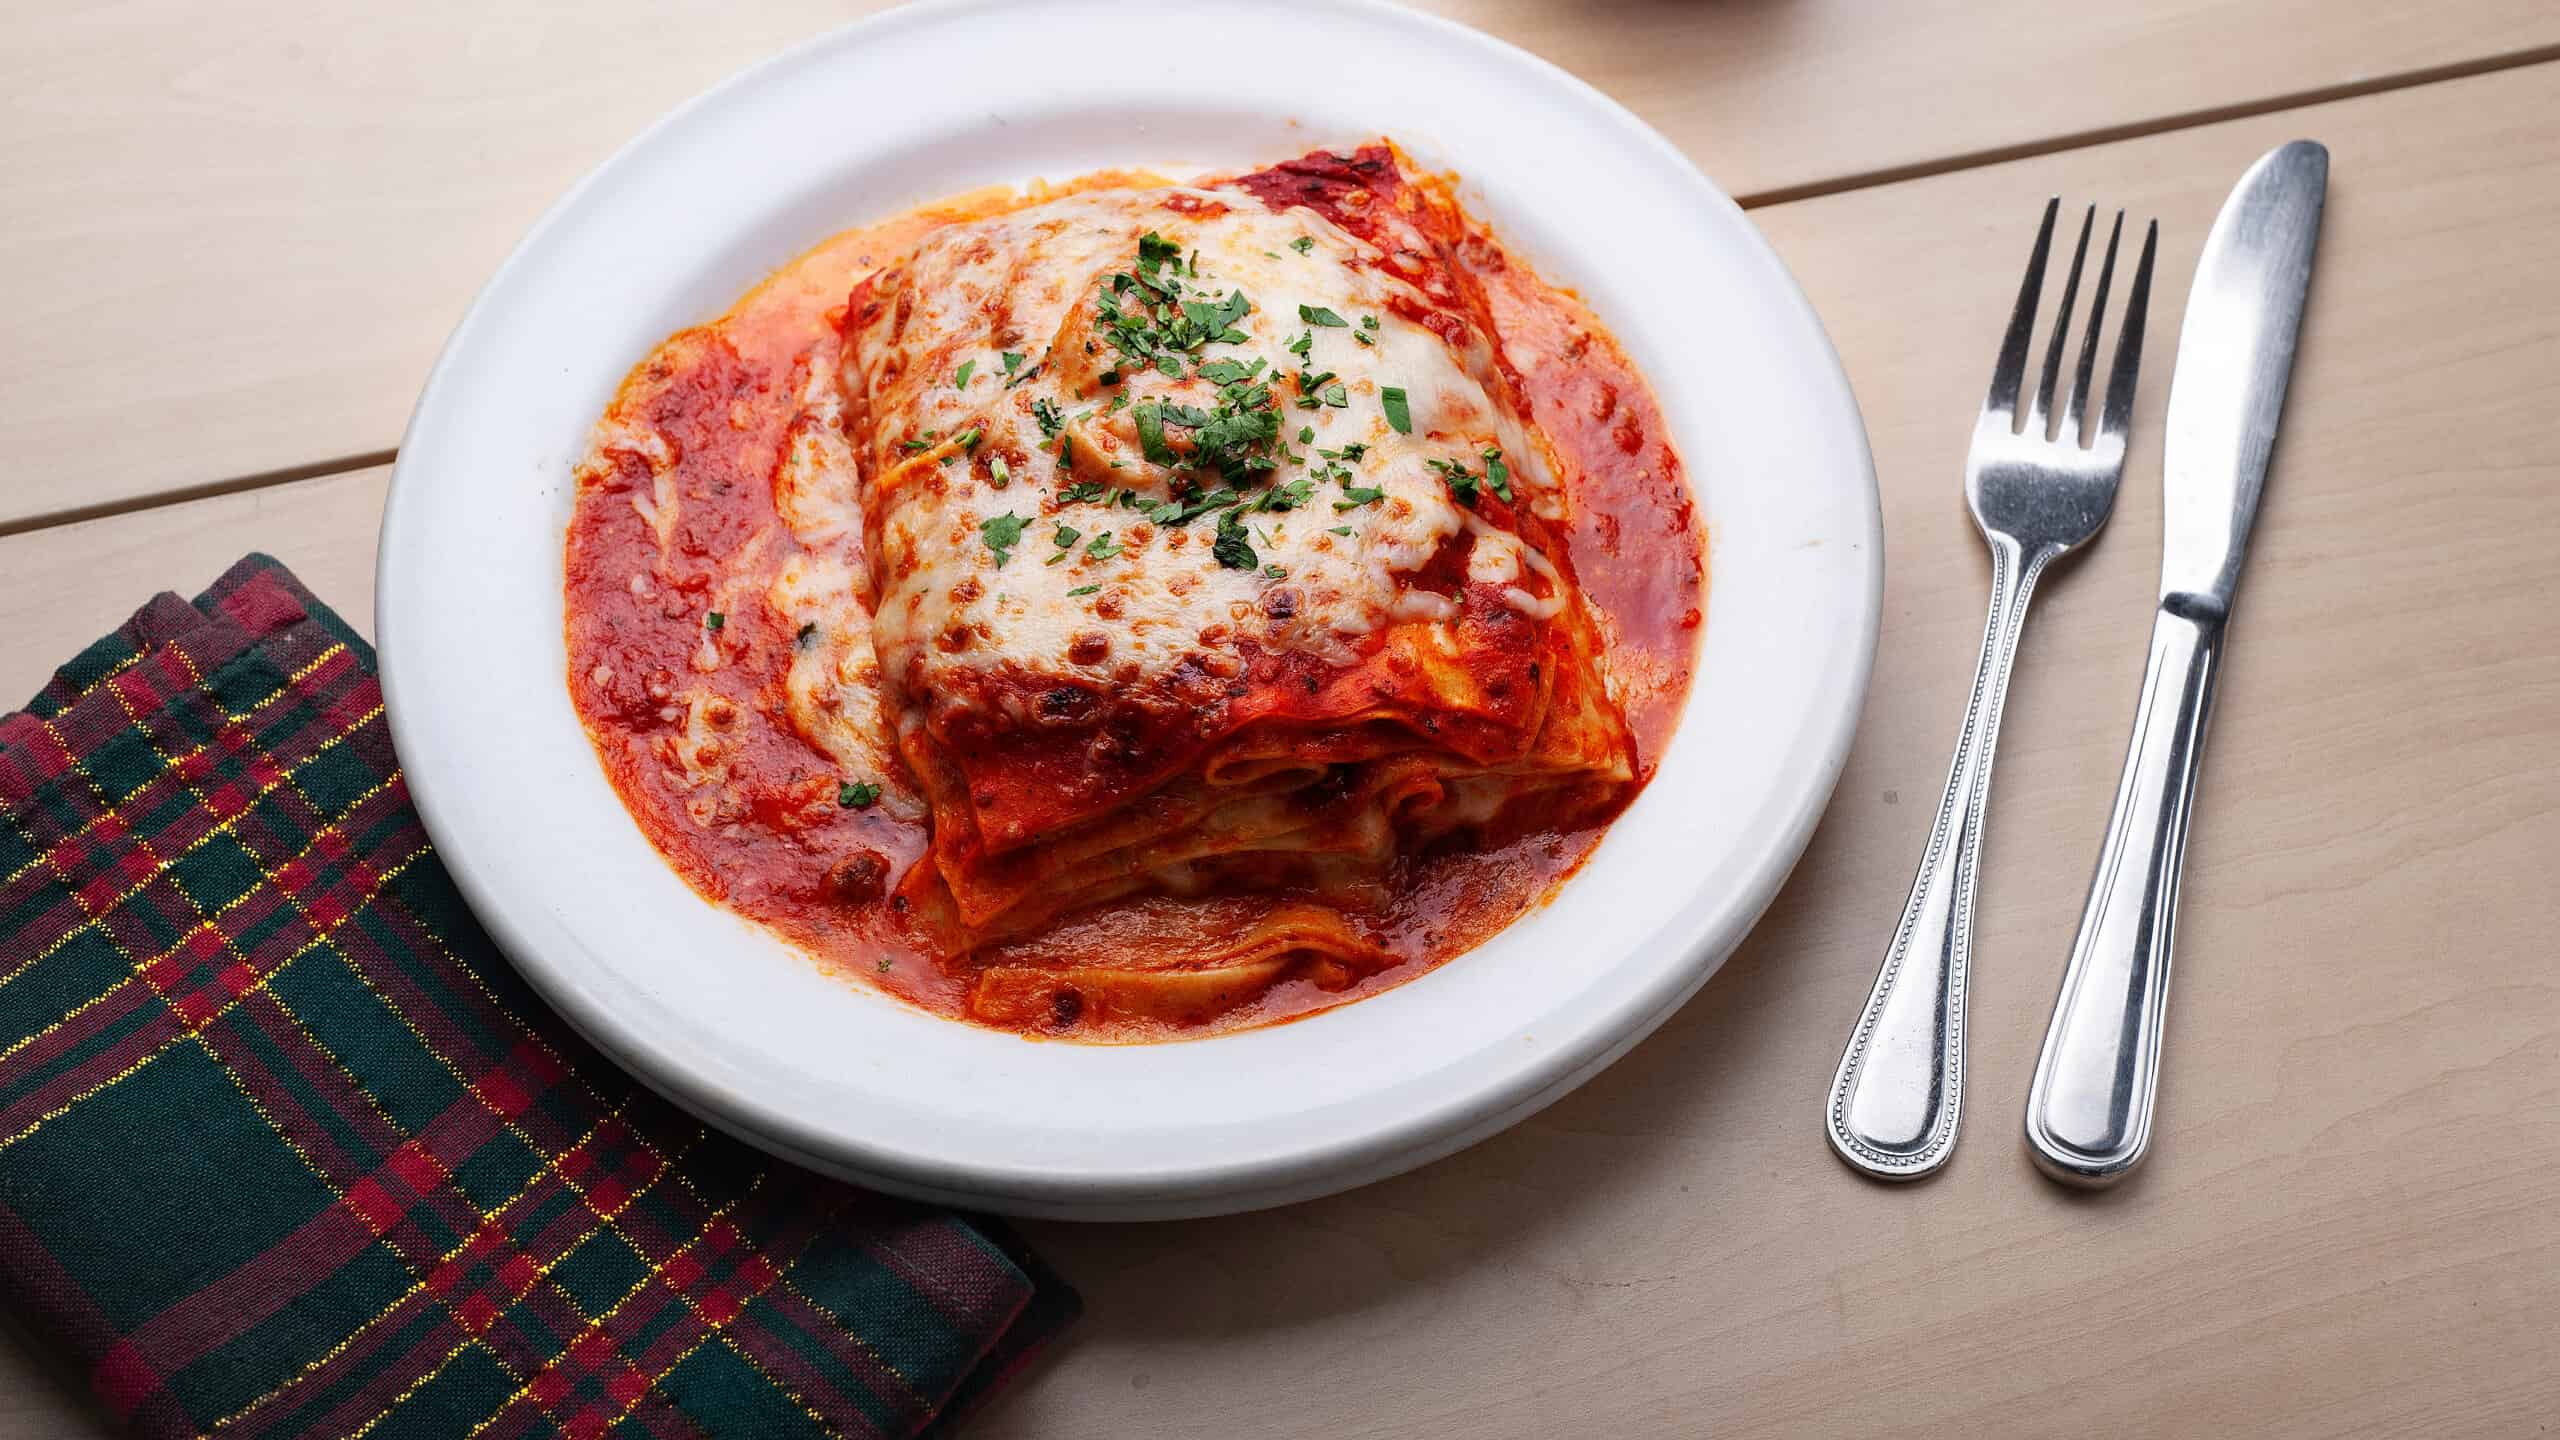 Lasagna Bolognese. Layers of flat lasagna noodles baked with alternating layers of slow-cooked Bolognese sauce, bechamel, and Parmesan cheese.